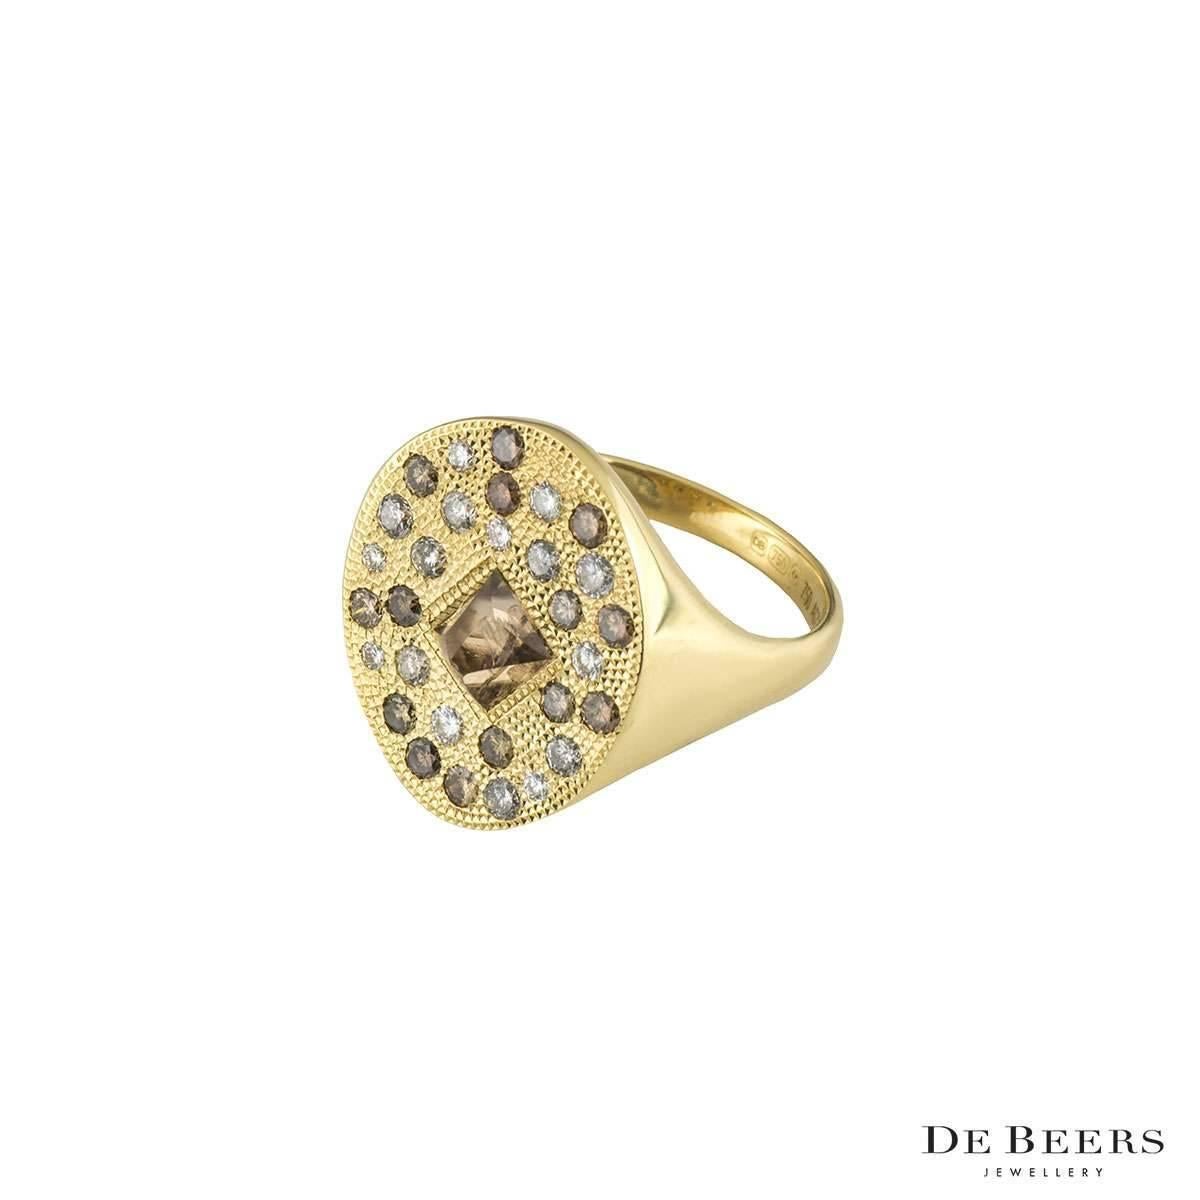 A unique 18k yellow gold De Beers diamond ring from the Talisman collection. The ring comprises of 31 rough diamonds which come to an approximate weight of 1.37ct, in various colours. The ring is a signet style which tapers to 2mm. The ring has a